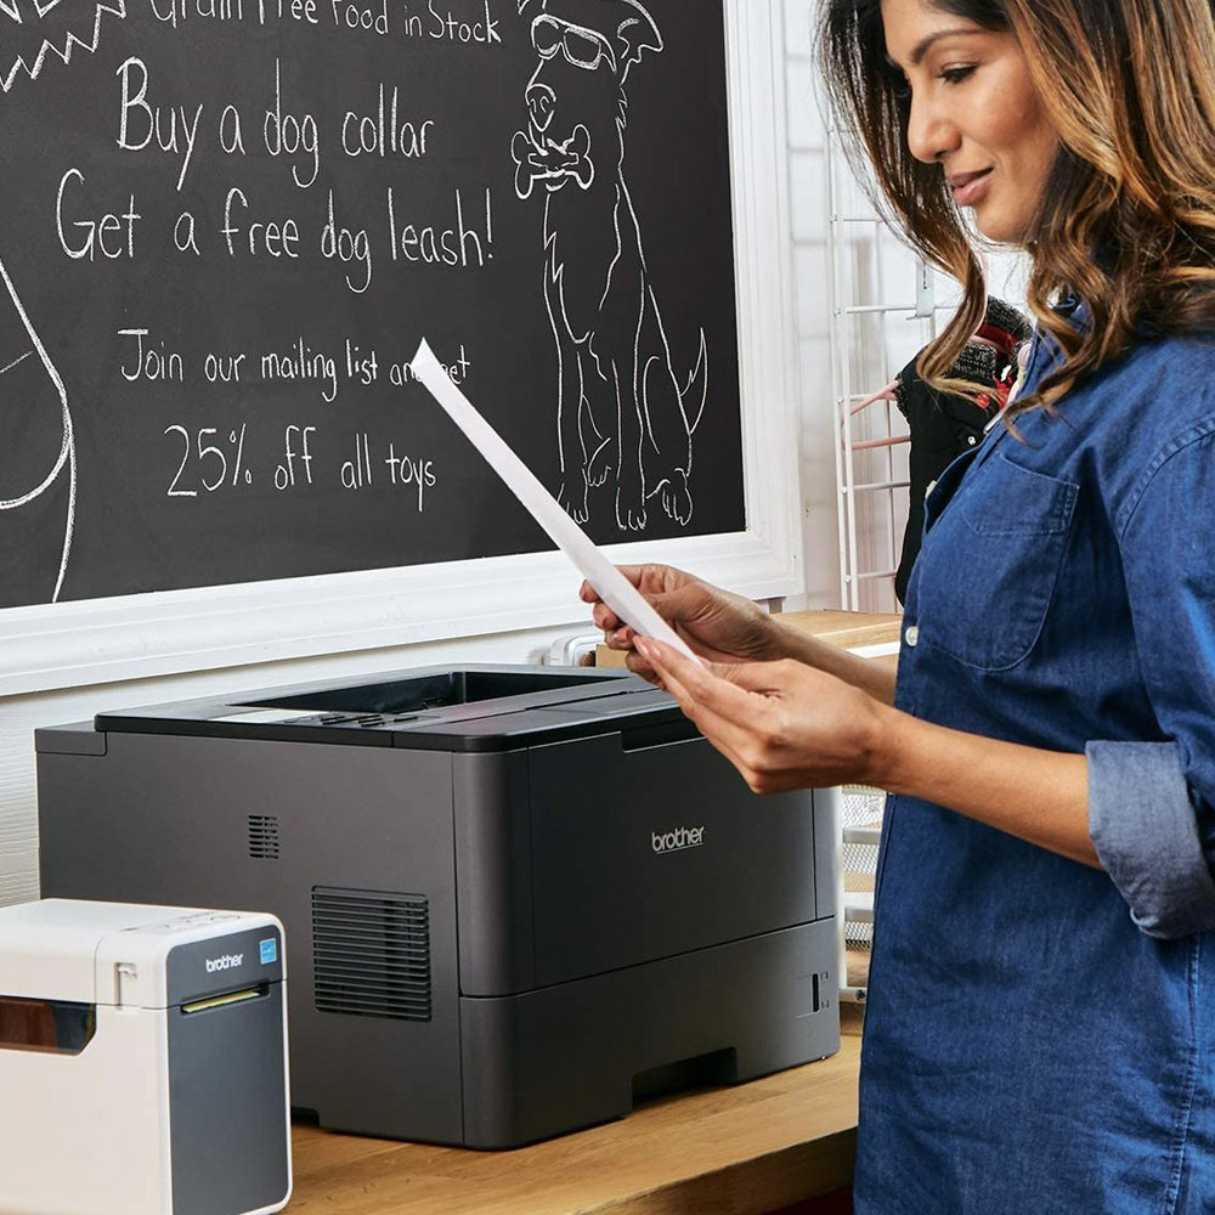  Brother MFCL2750DW Monochrome All-in-One Wireless Laser Printer,  Duplex Copy & Scan, Includes 4 Month Refresh Subscription Trial and   Dash Replenishment Ready : Office Products